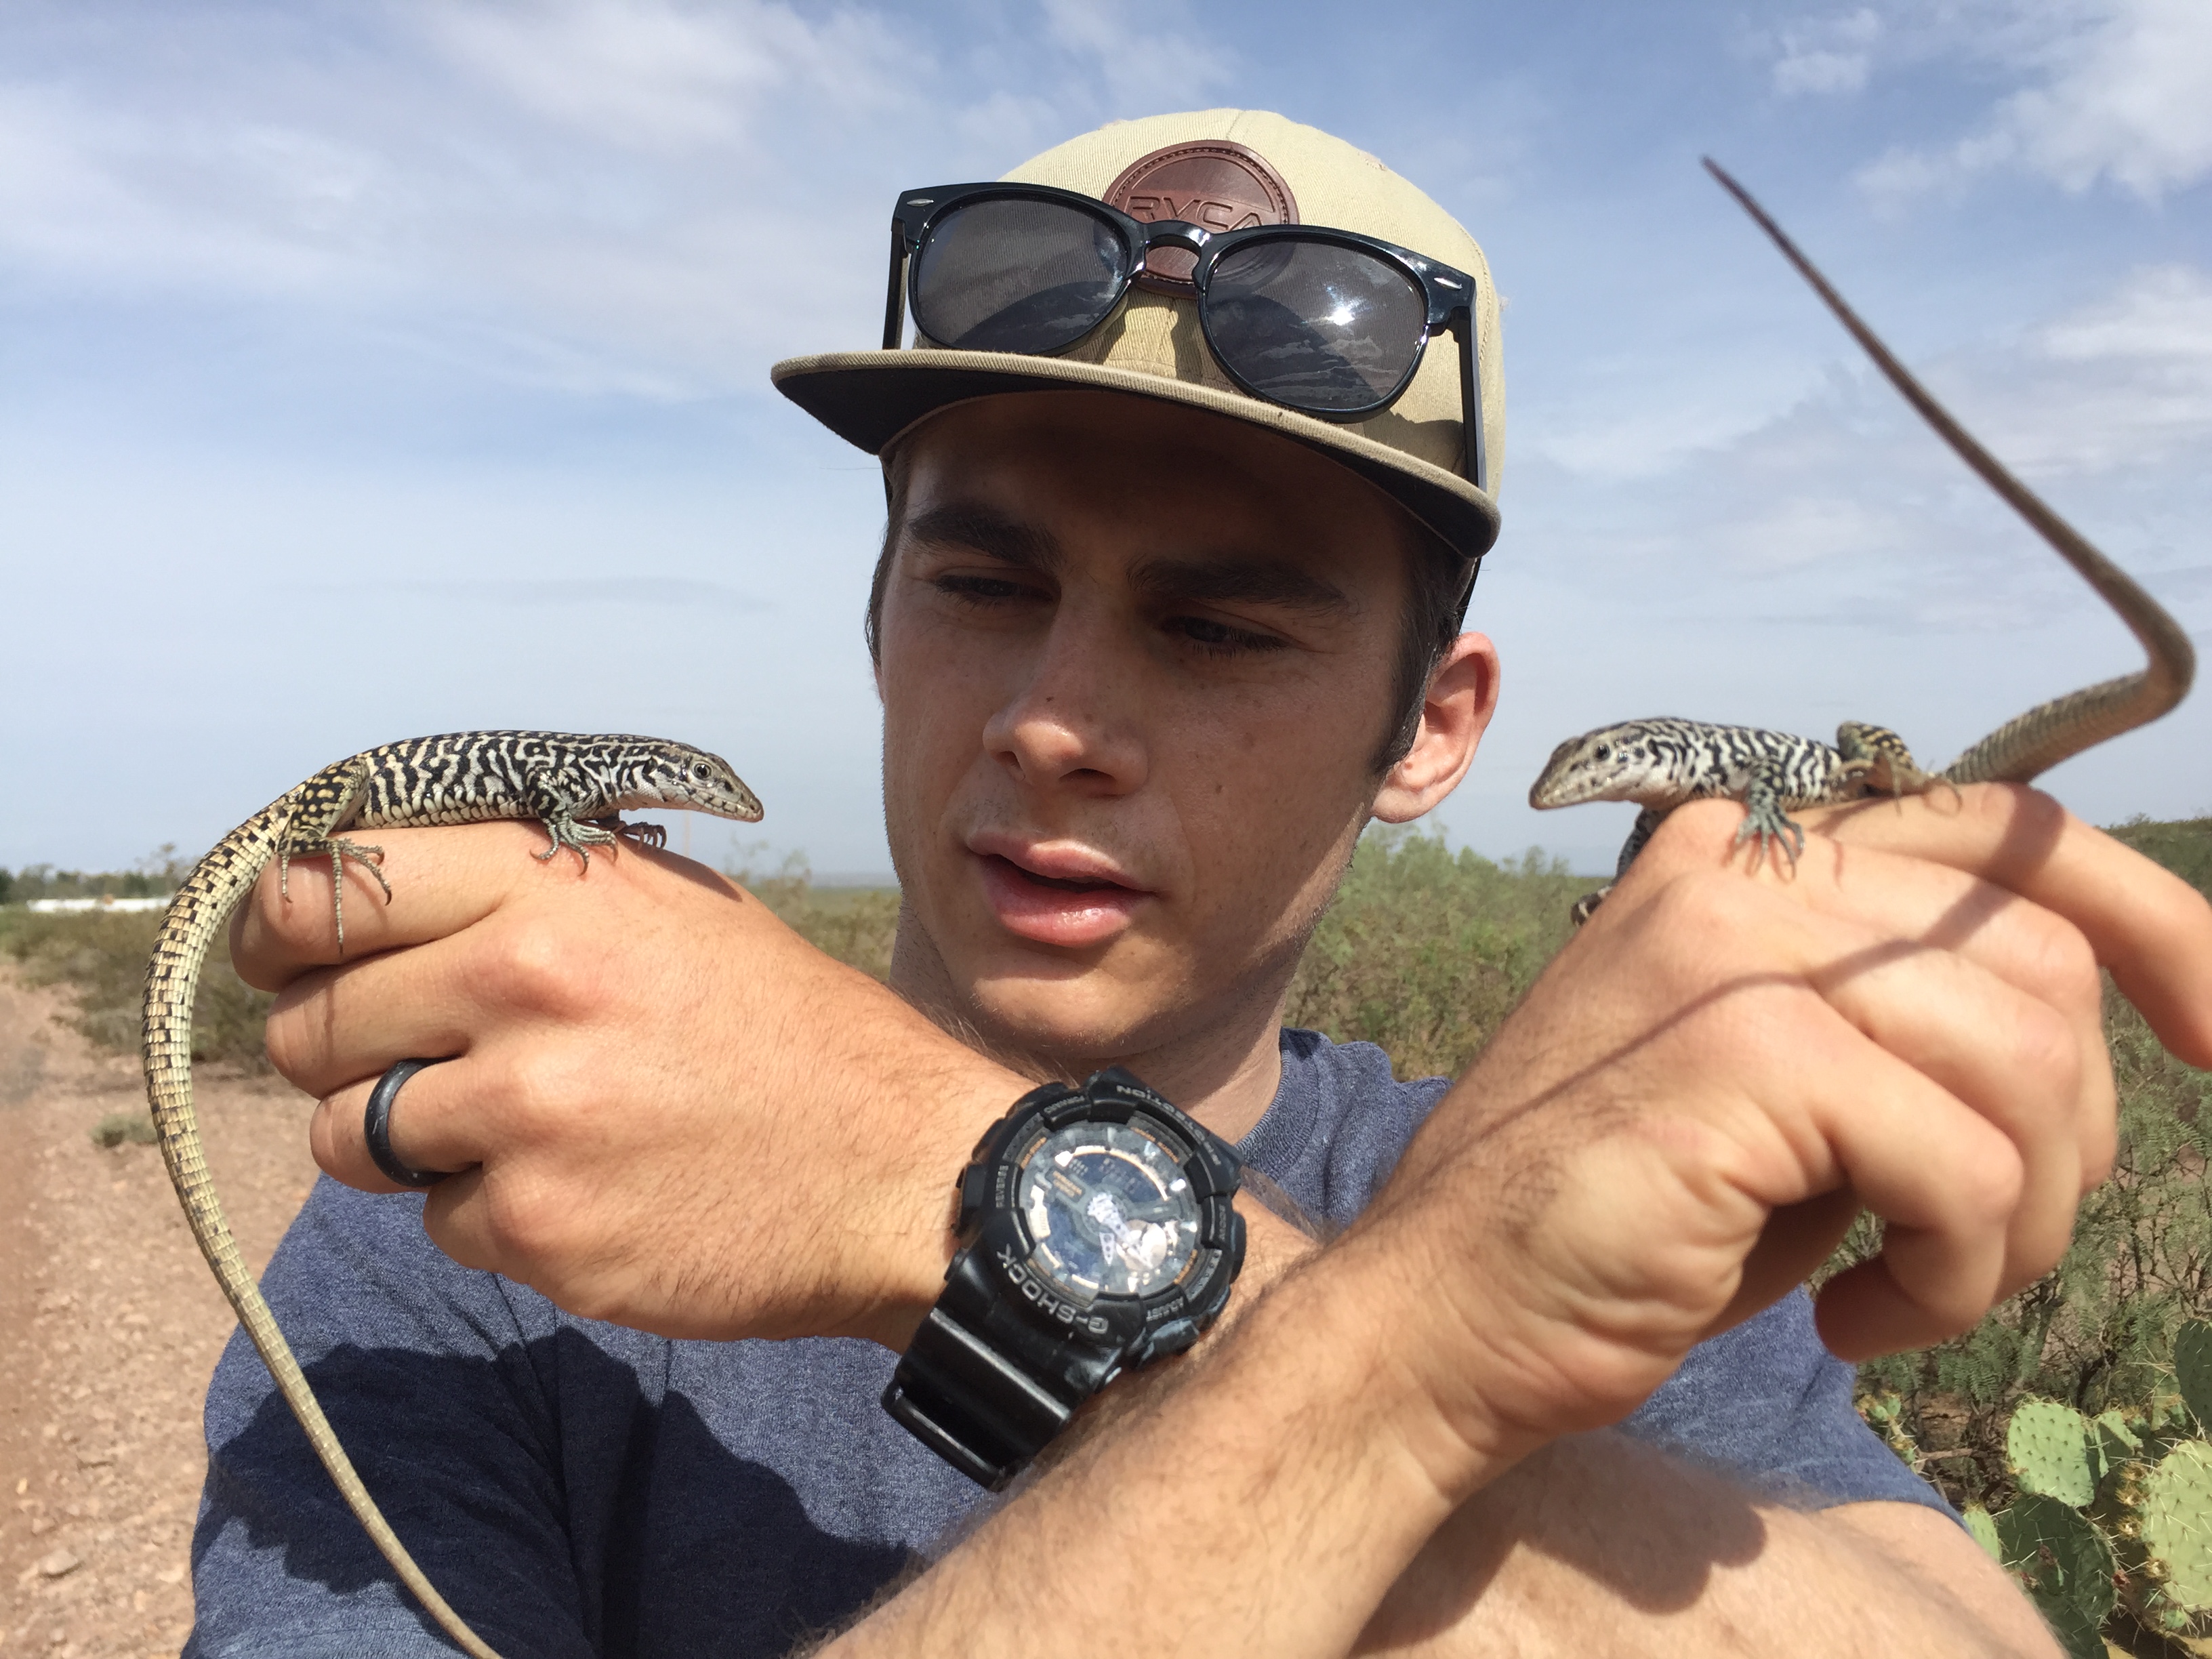 Auburn Student Honored with Research Award on Reptile Study